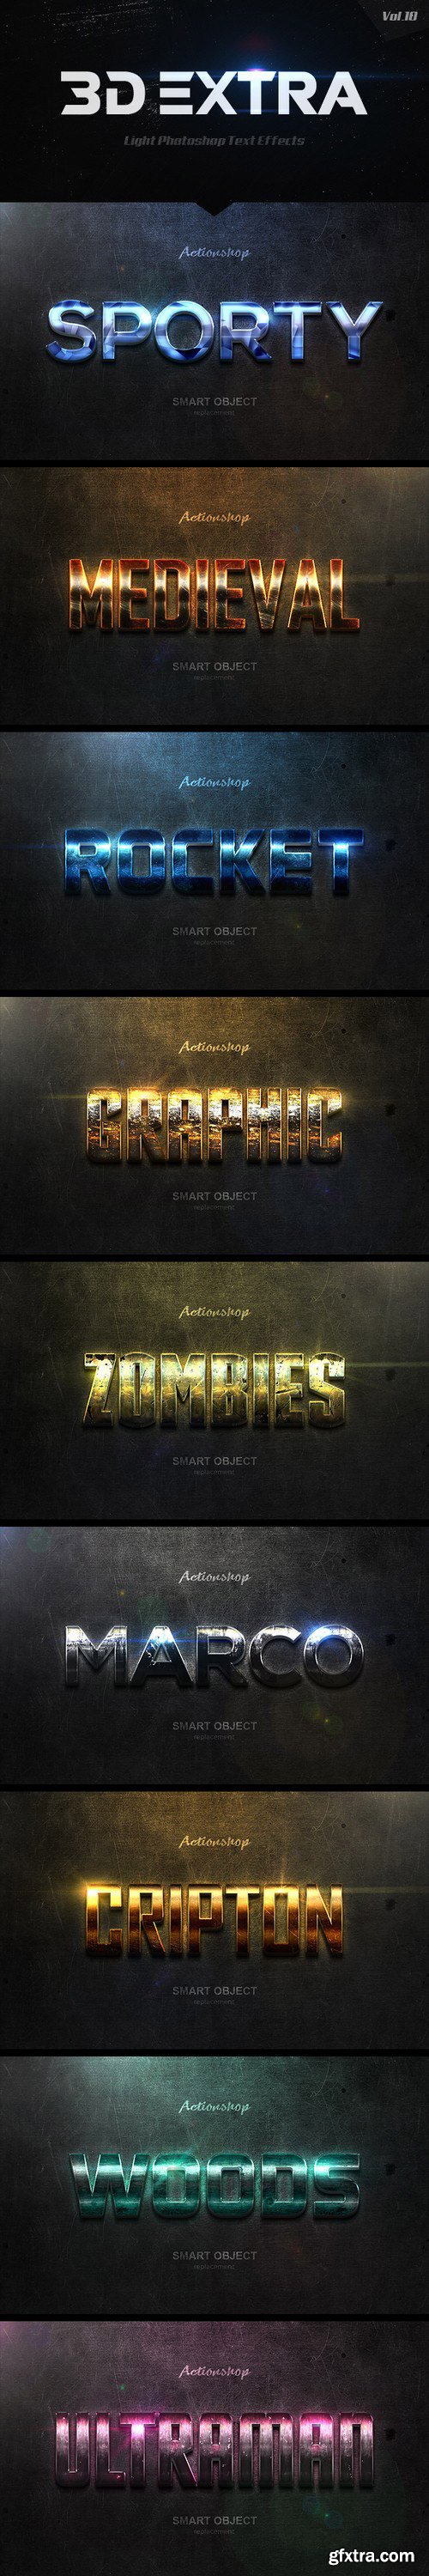 Graphicriver - New 3D Extra Light Text Effects Vol.10 20466716